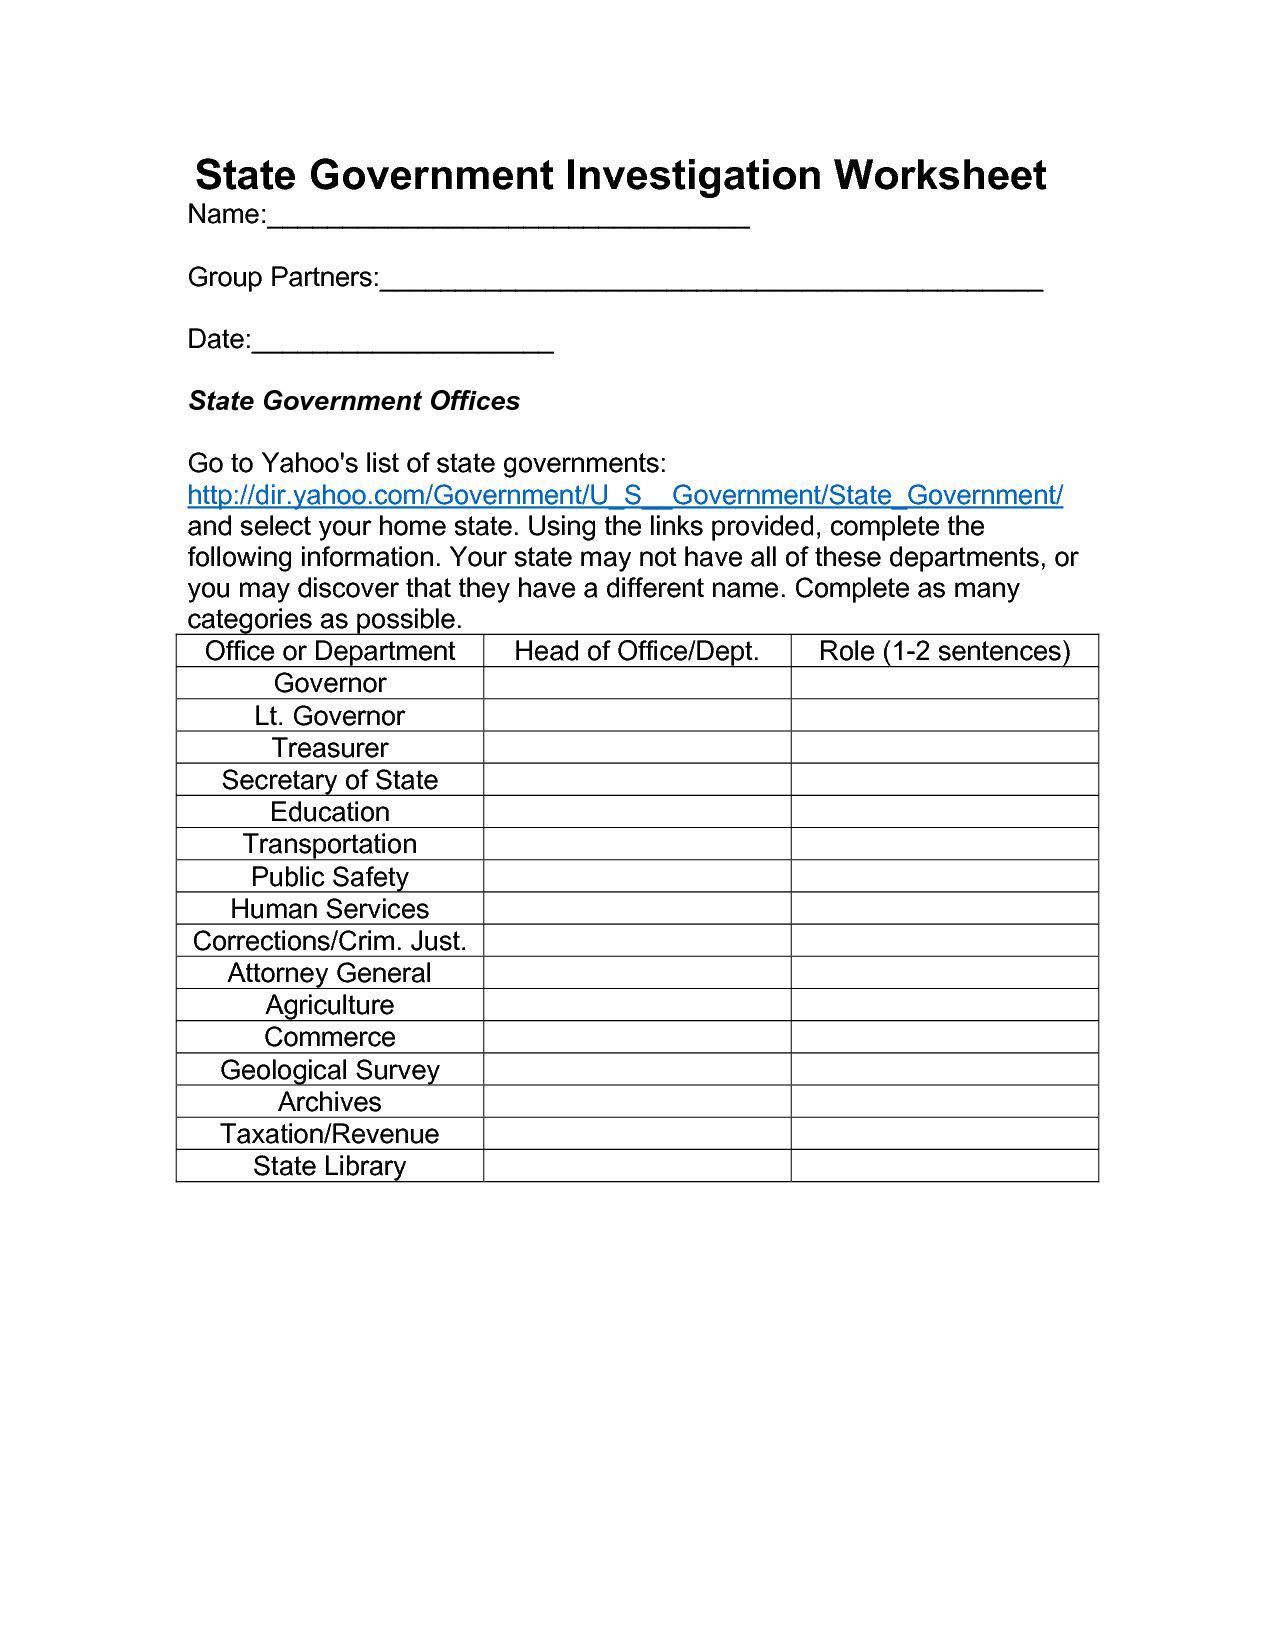 State Branches of Government Worksheet